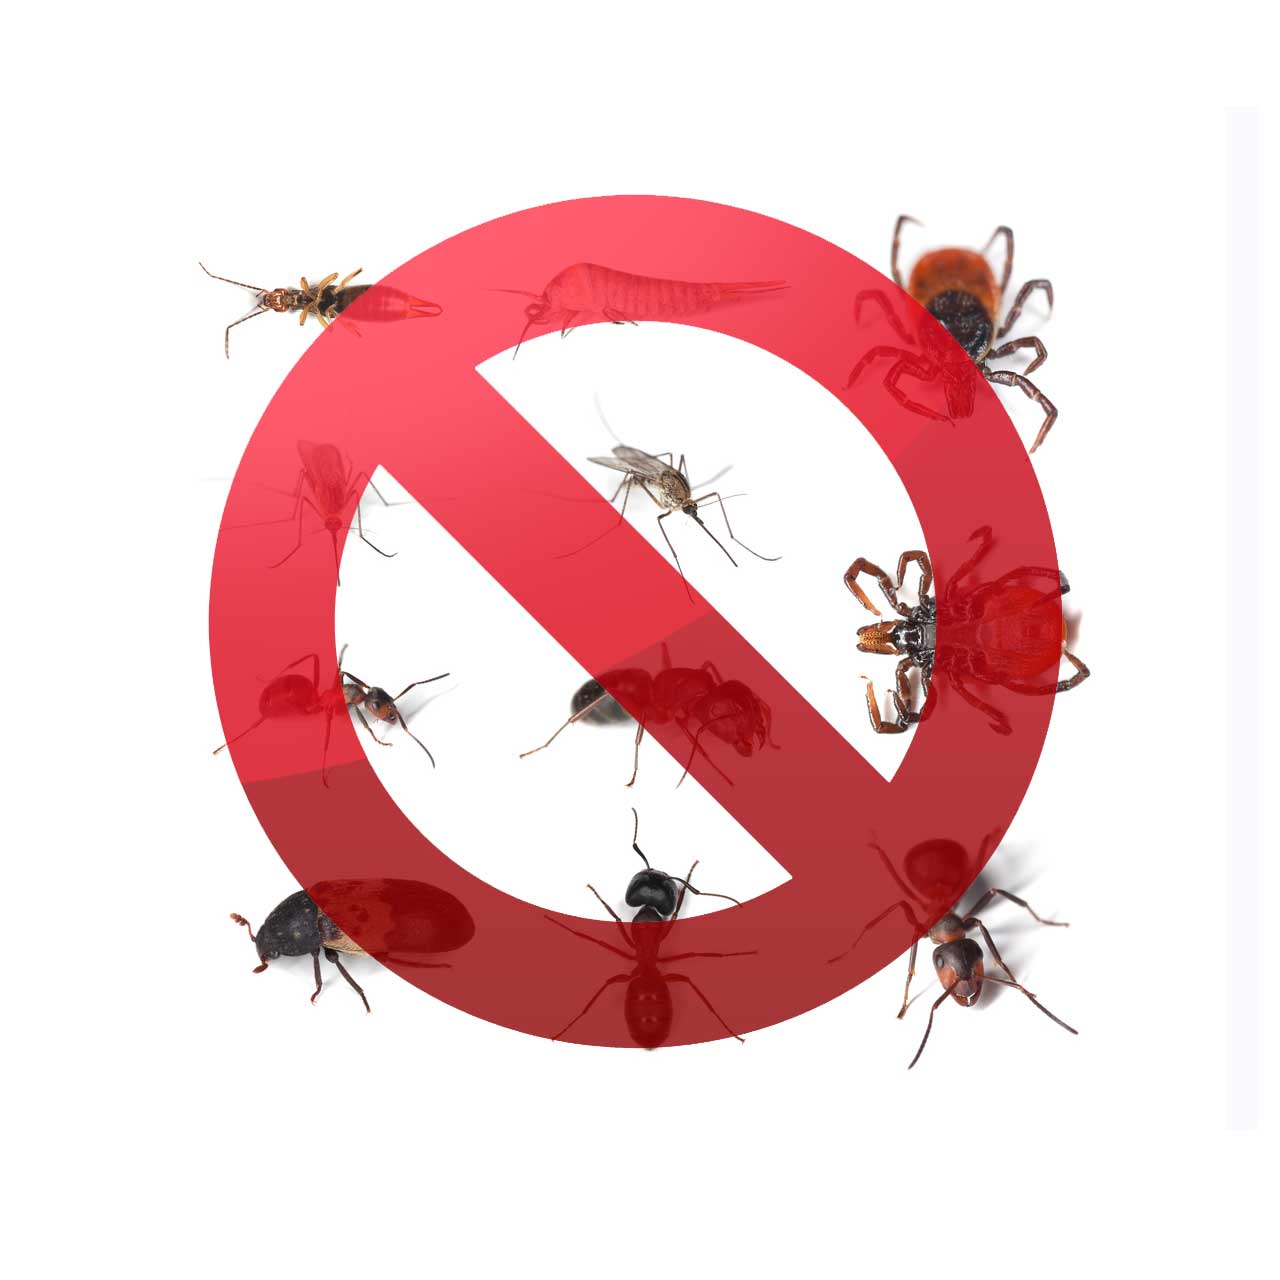 Why We Are Pest Control Experts